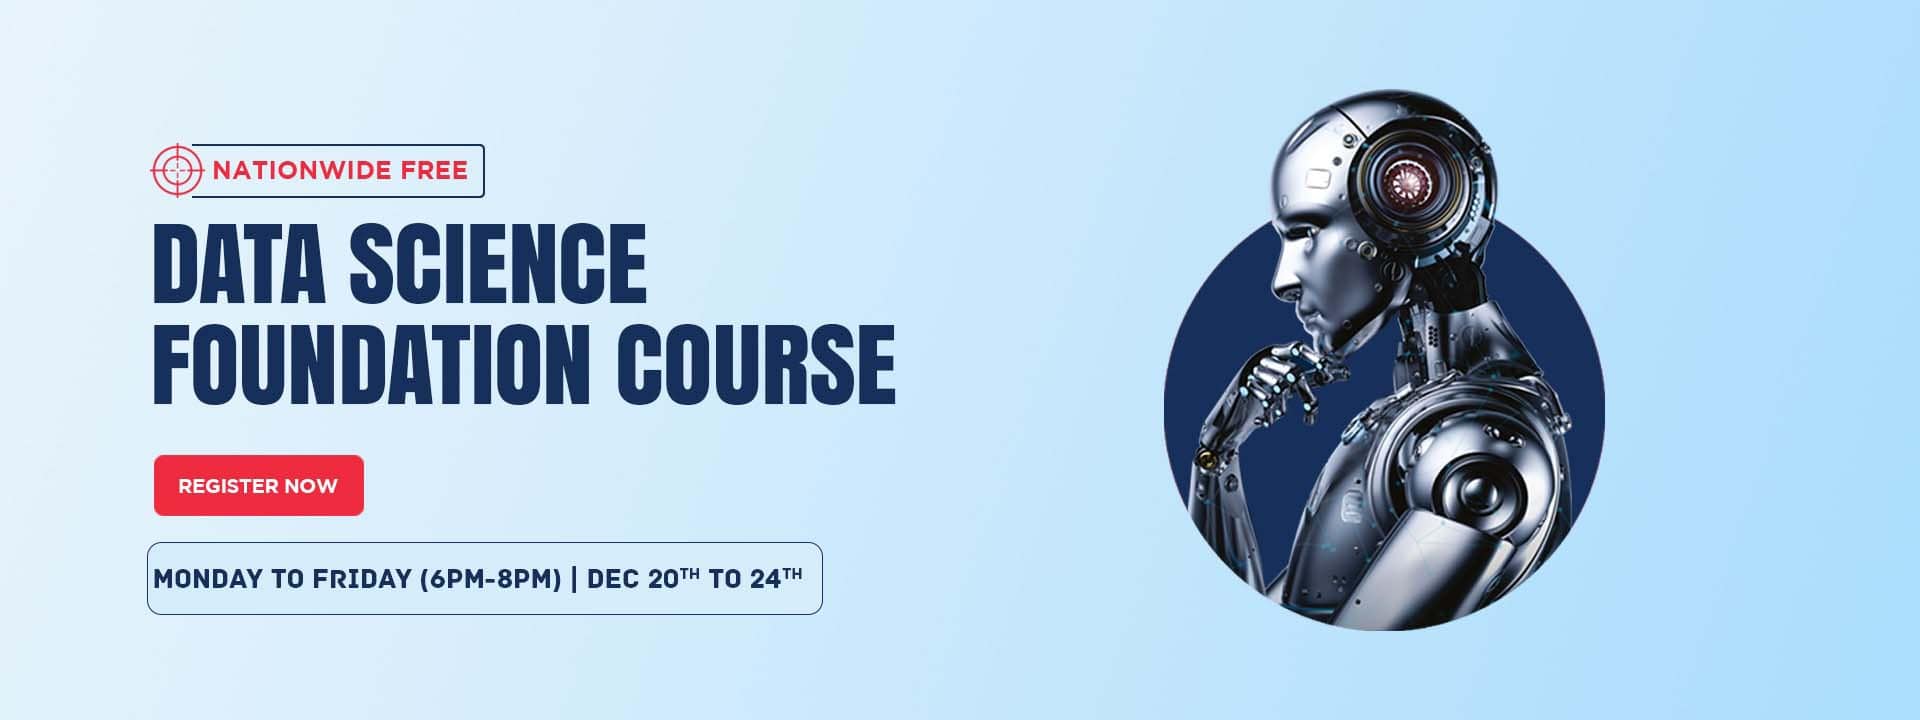 Nationwide-Free-workshop-on-Data-Science-Foundation-Course (1)-min